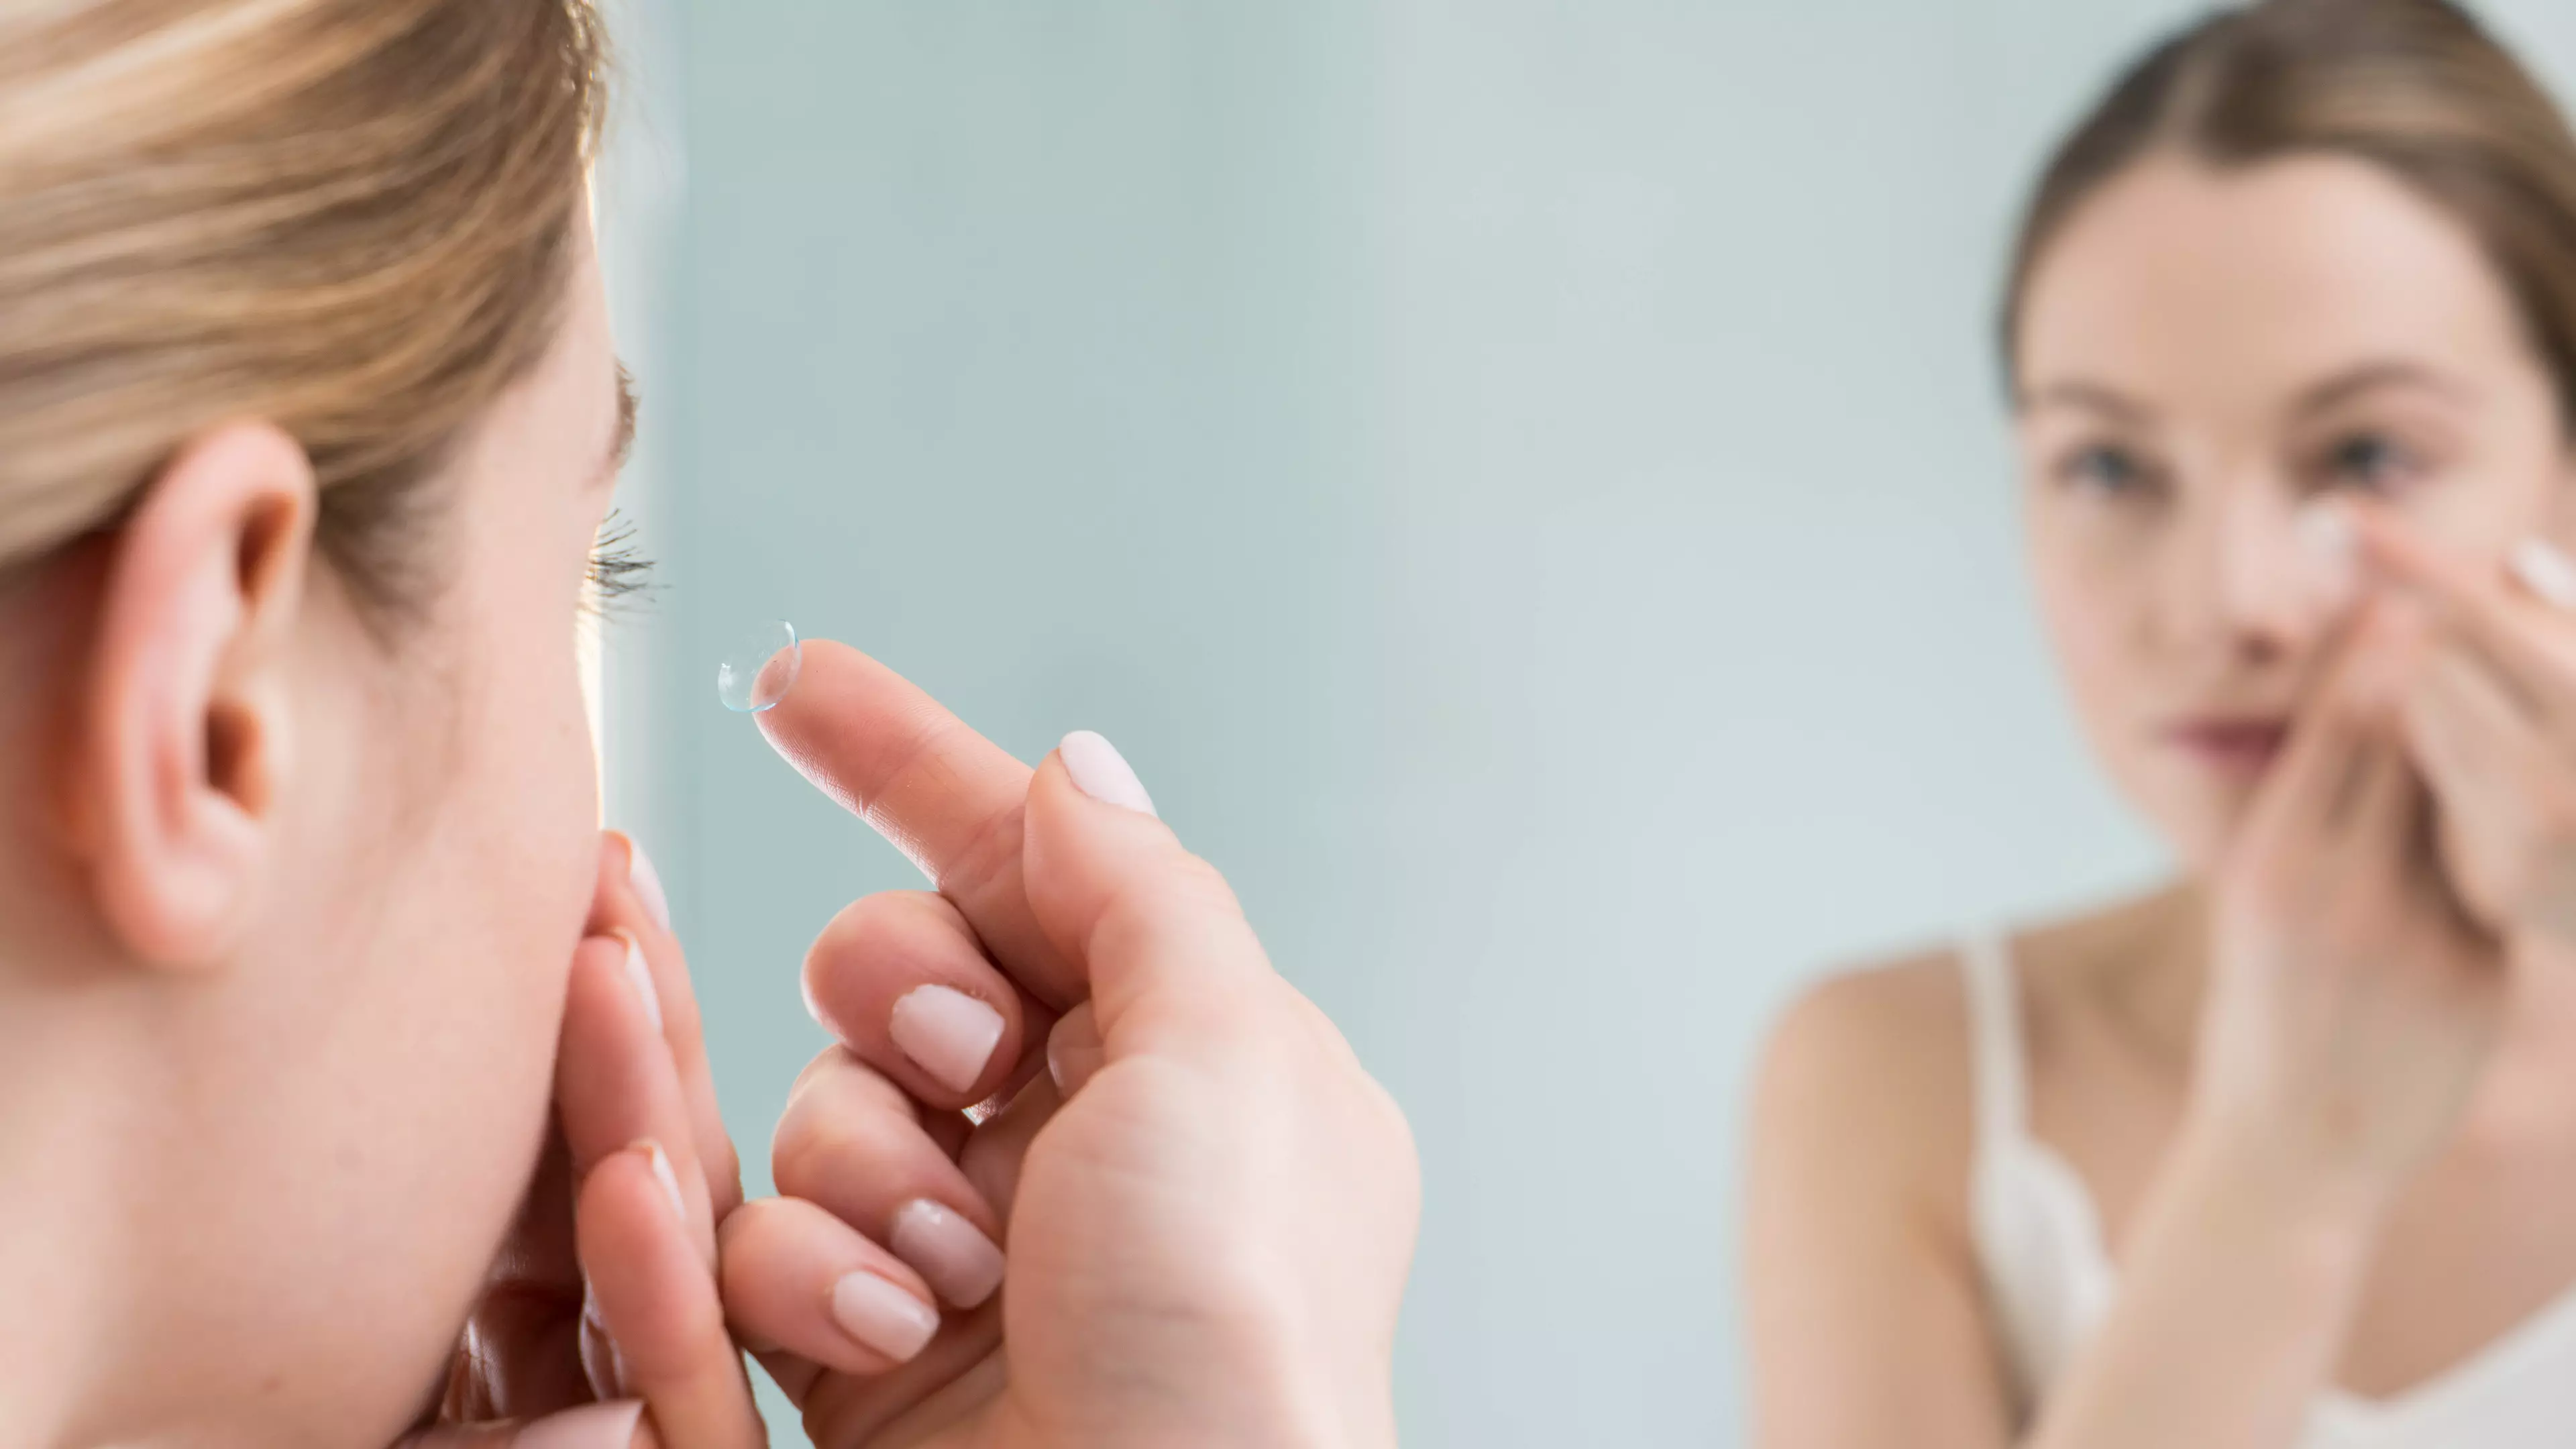 Contact Lens Wearers Urged To Check Packs In Urgent Product Recall 